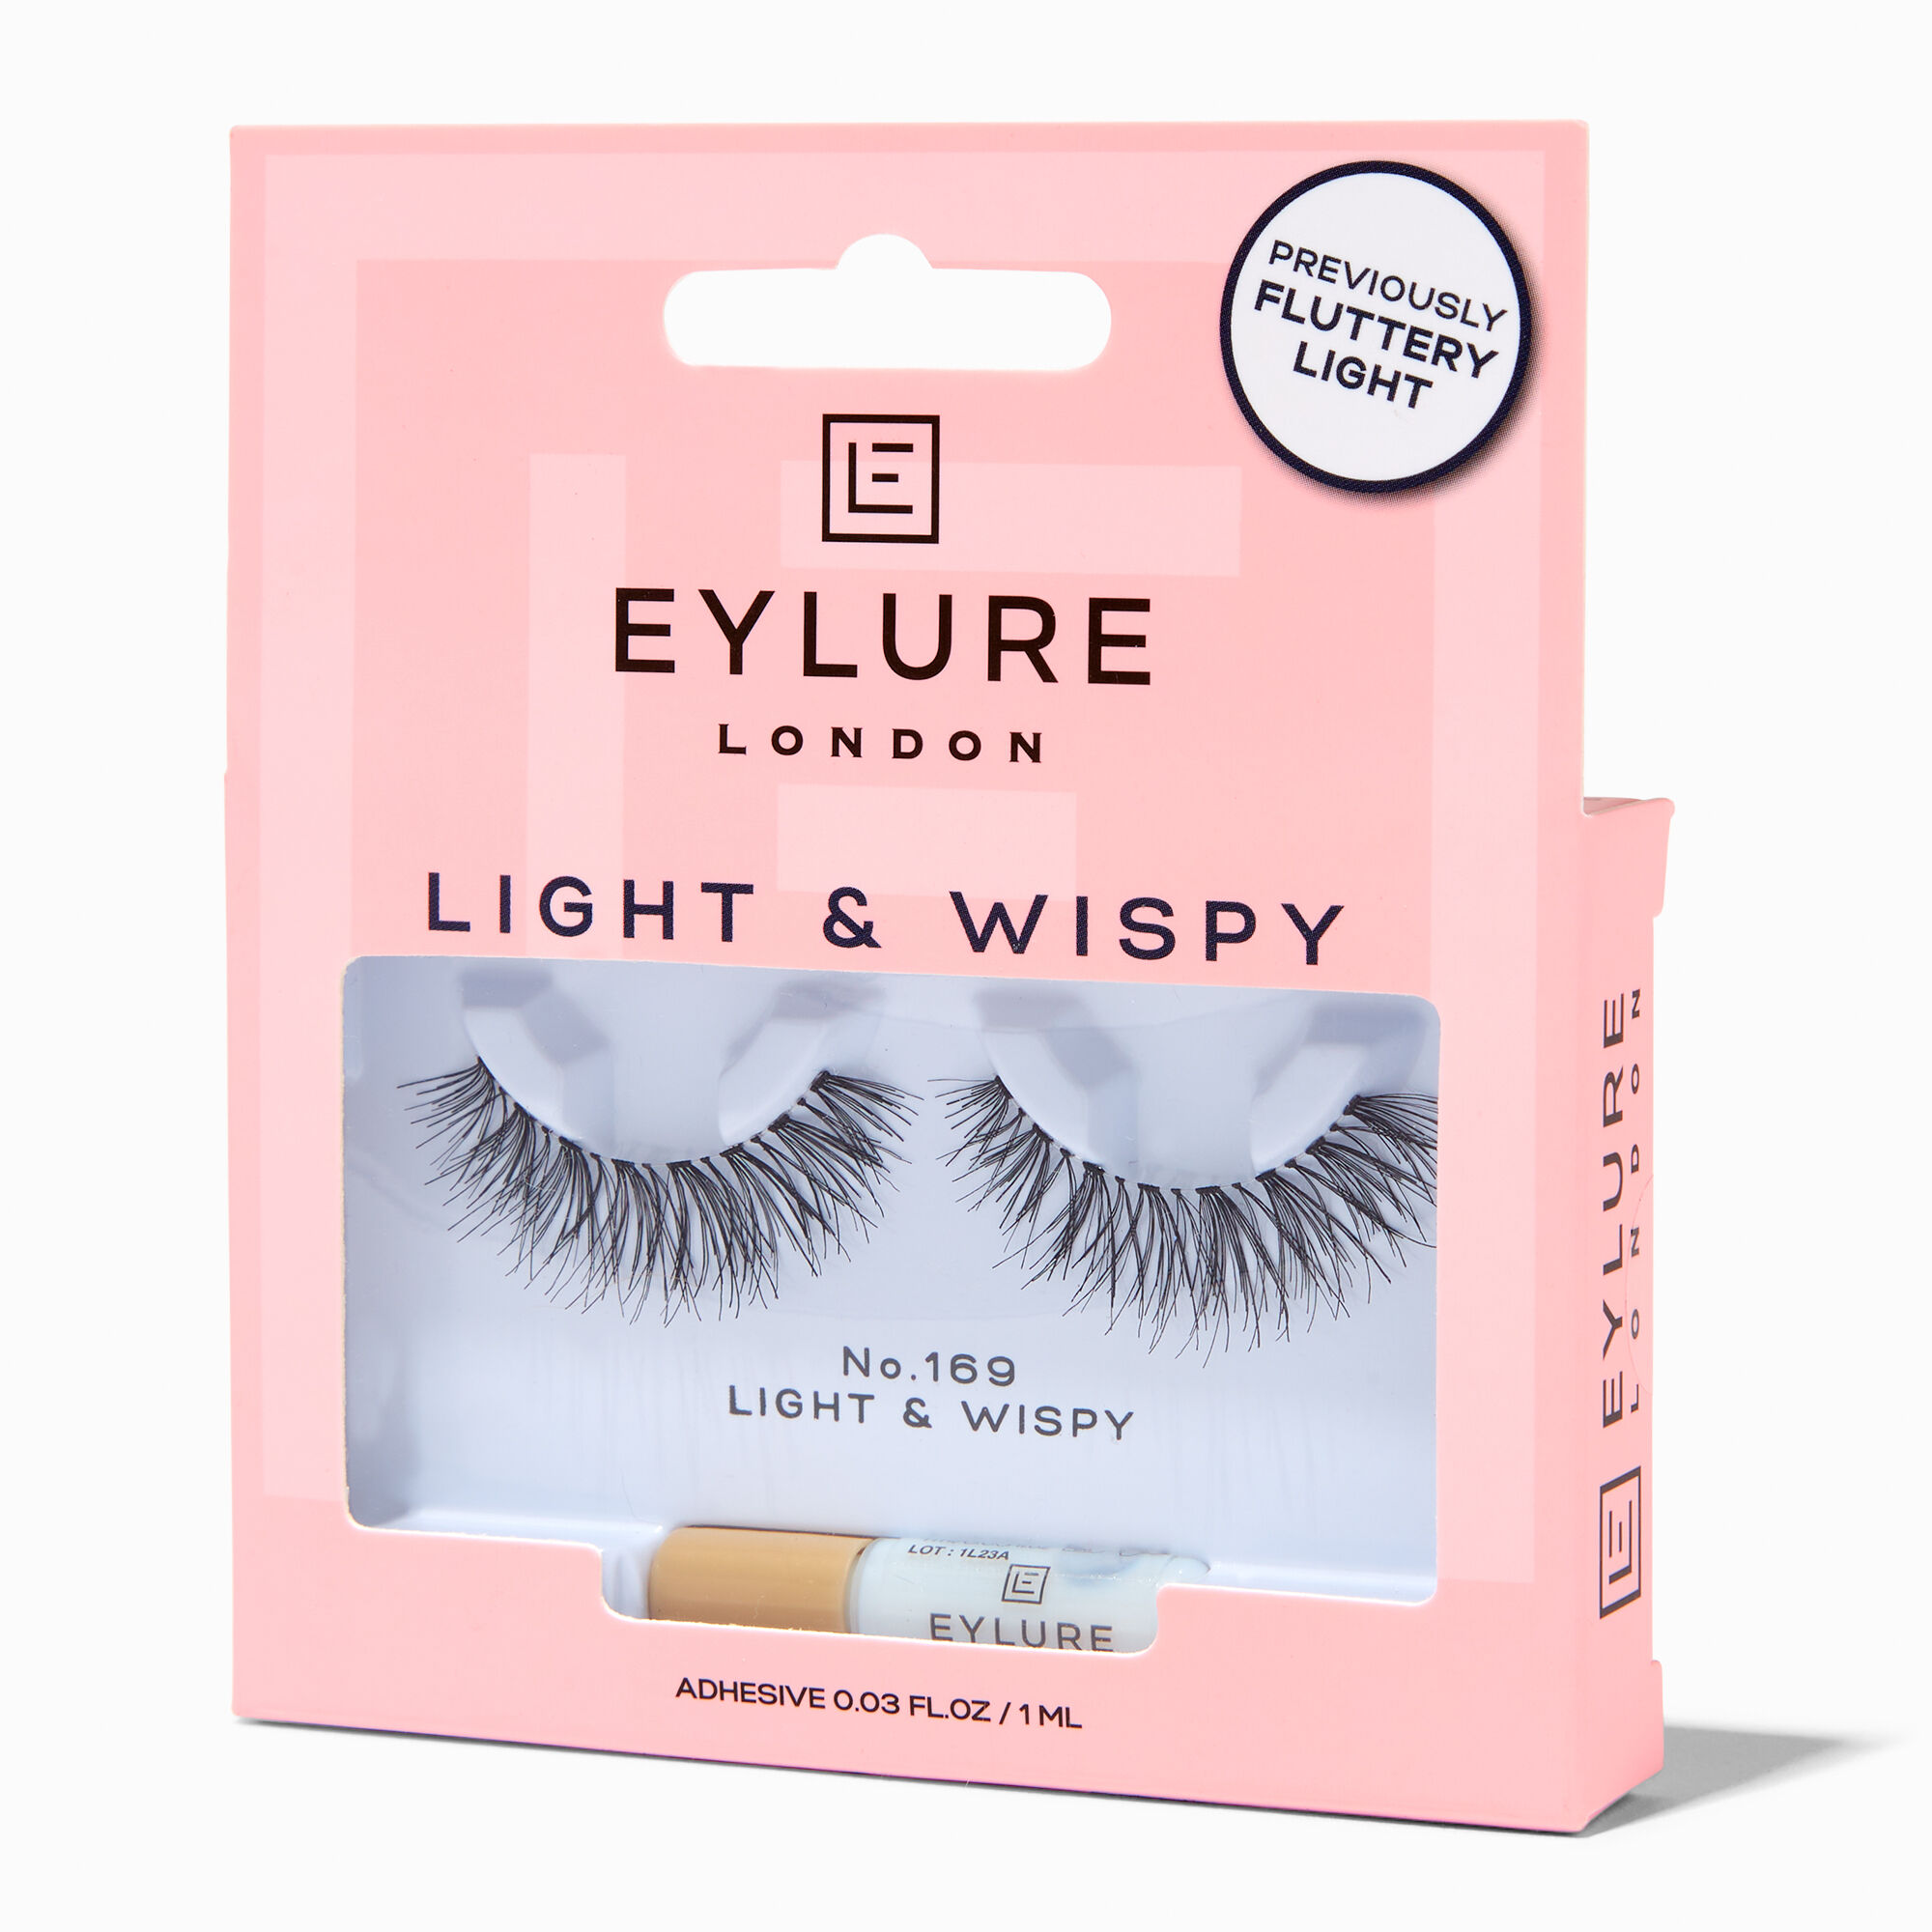 View Claires Eylure Wispy Light False Lashes No 169 information